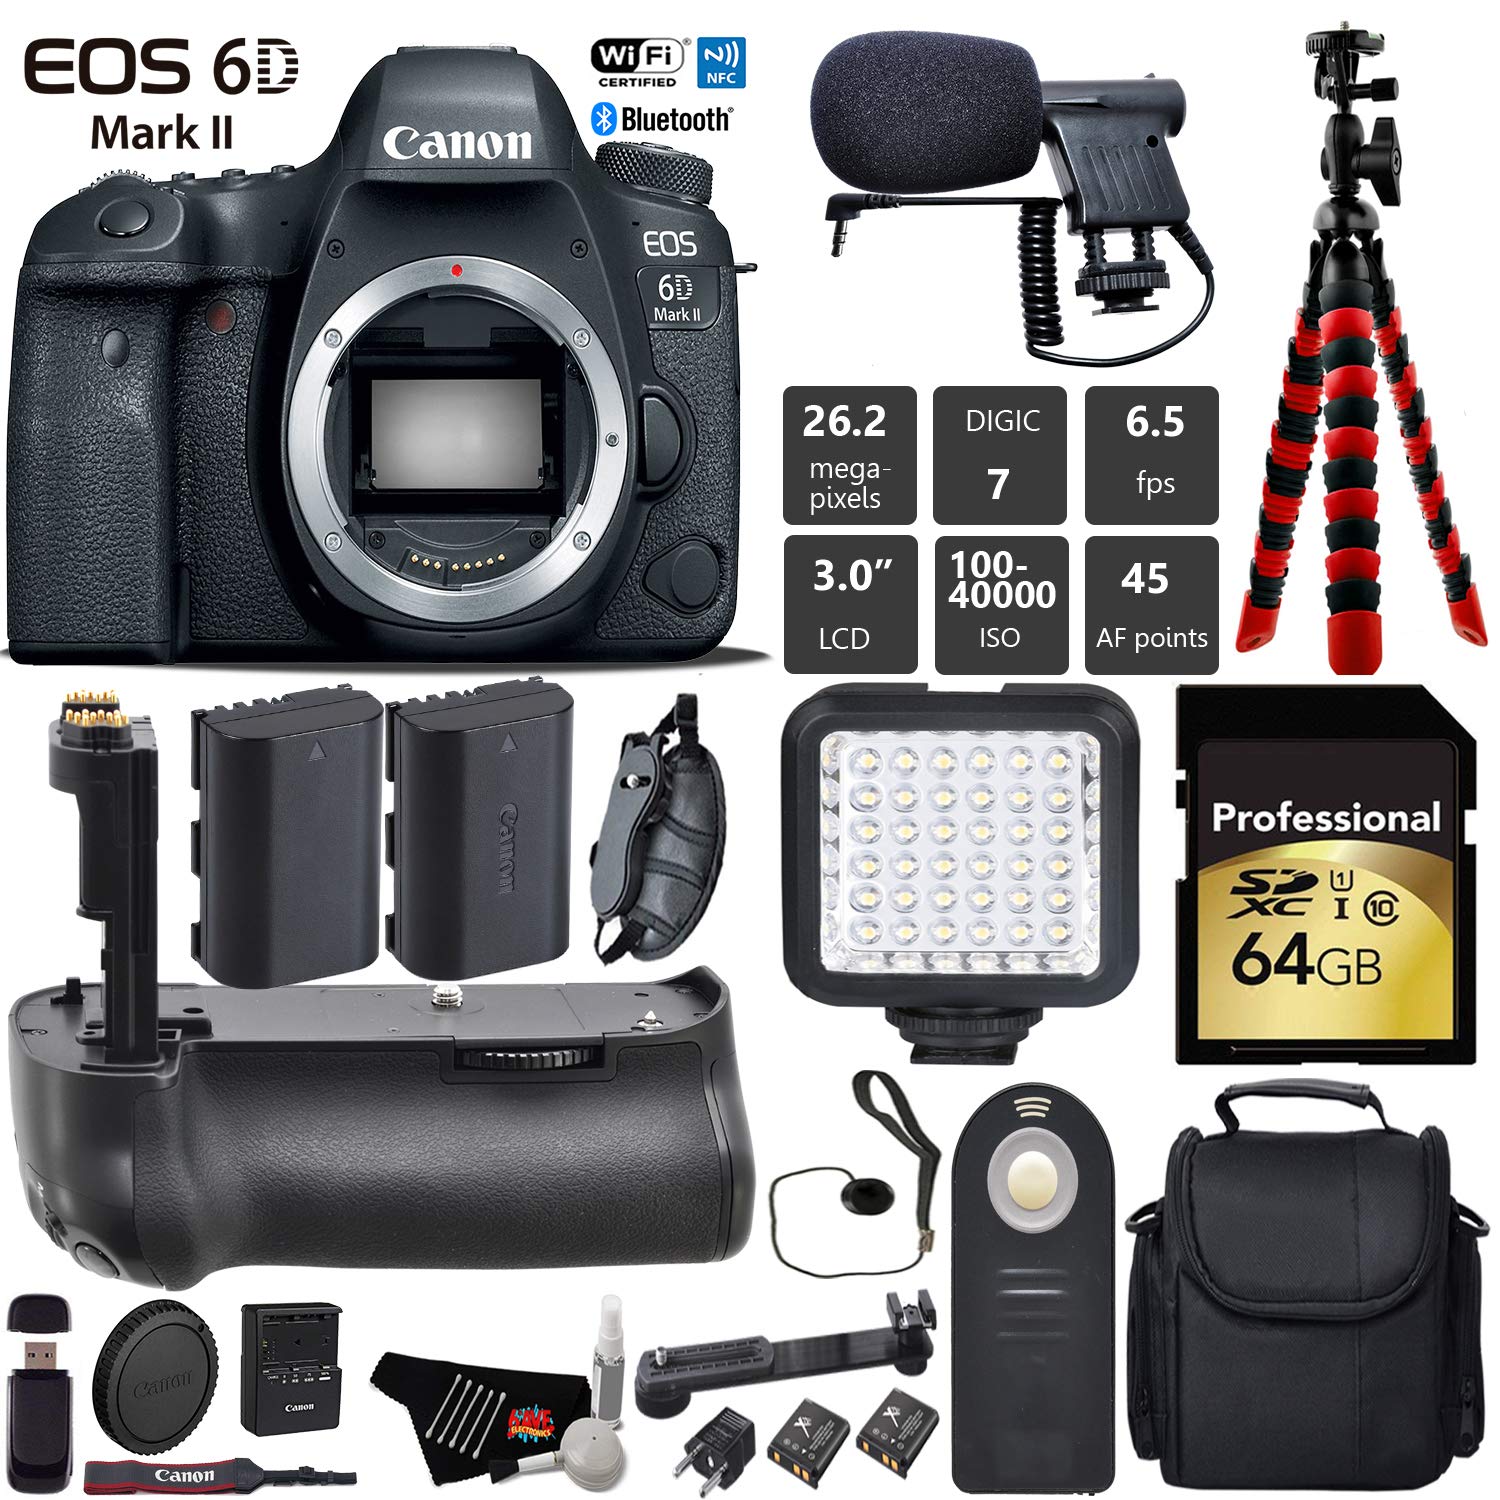 Canon EOS 6D Mark II DSLR Camera (Body Only) + Professional Battery Grip + Condenser Microphone + LED Kit + Extra Battery Pro Bundle